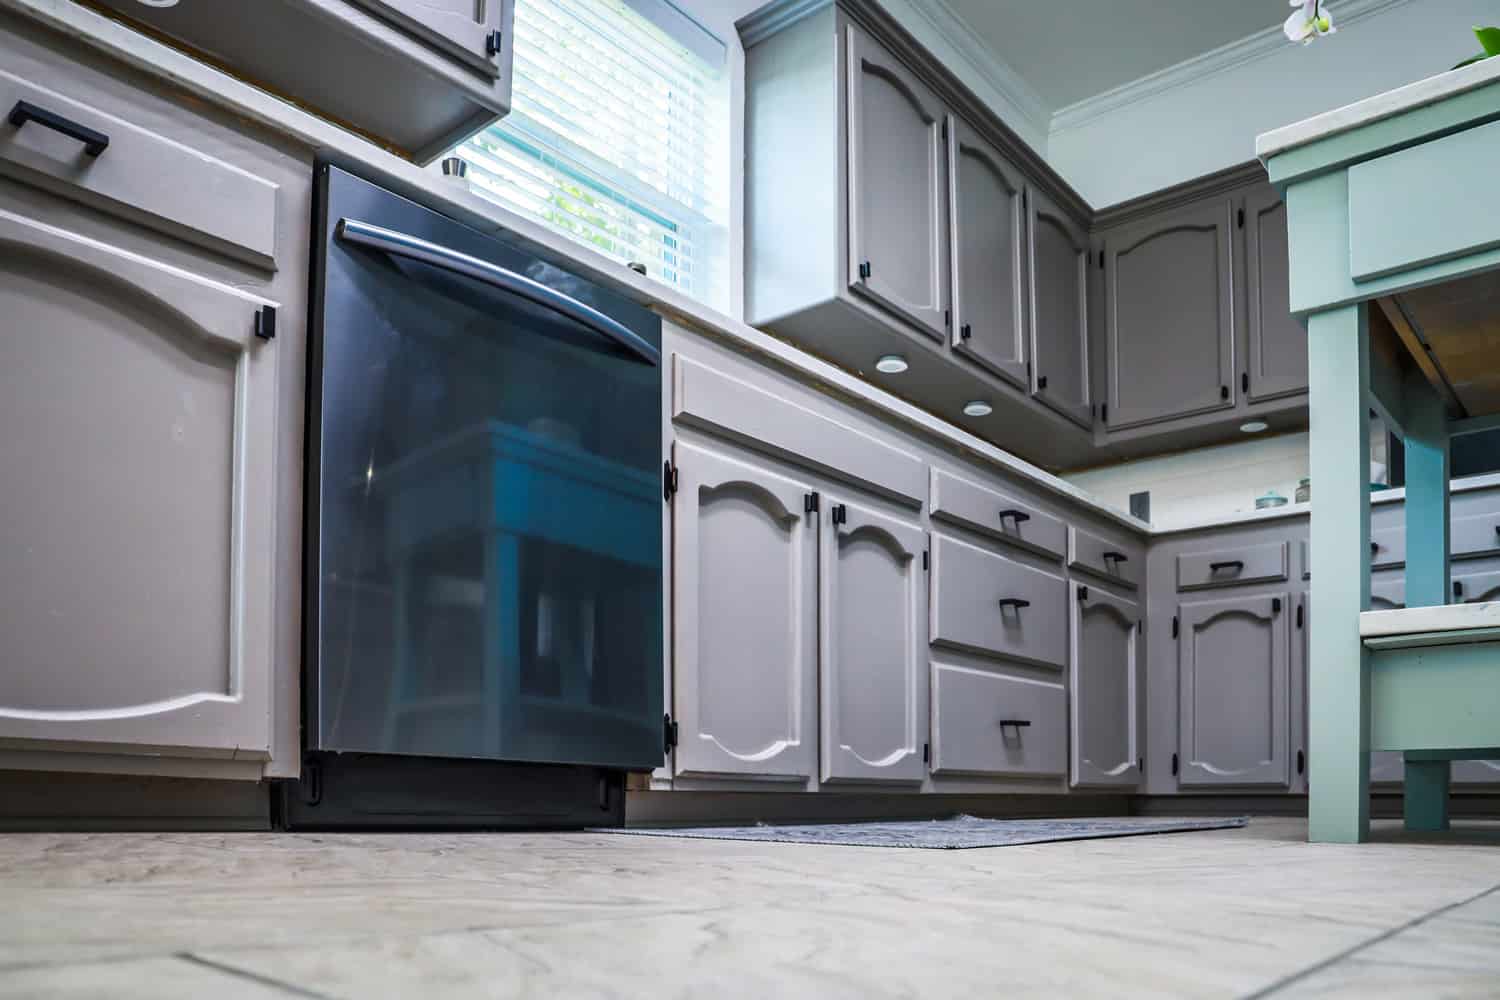 Low angle view of a renovated kitchen in an older home with painted gray cabinets, marble countertops, a small portable island and a tiled floor.